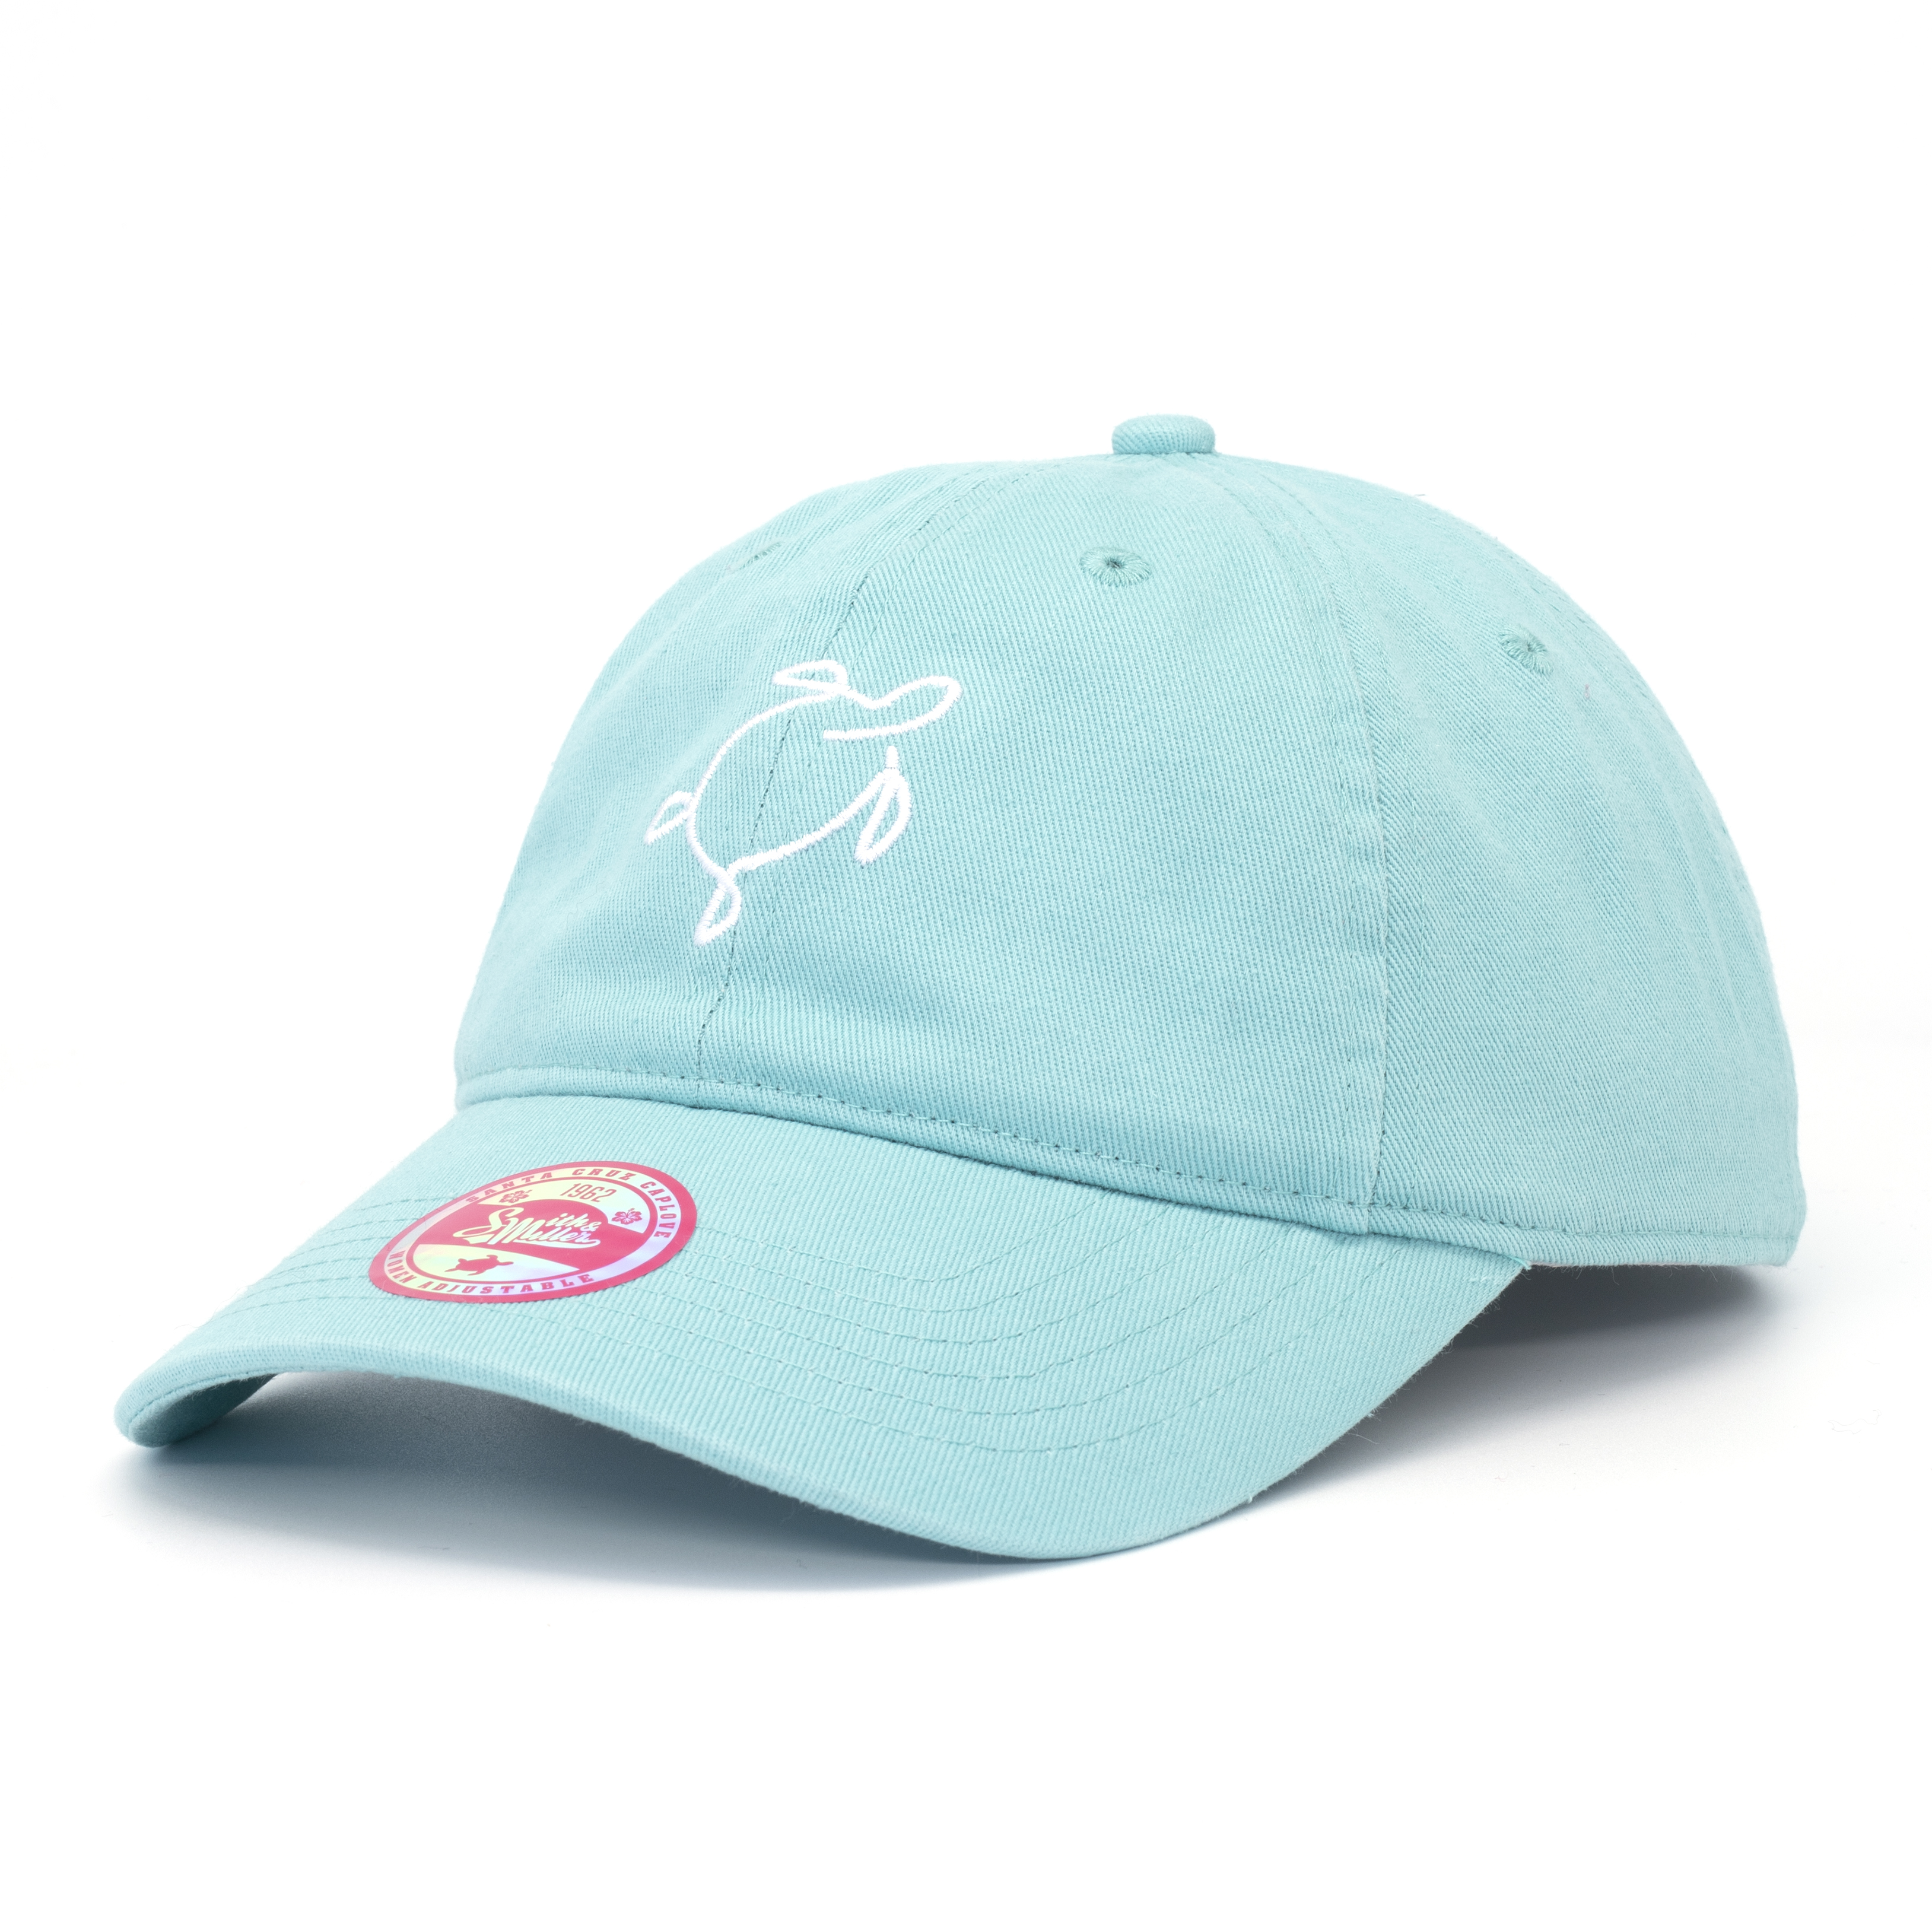 Smith & Miller Filley Women Unstructured Cap, turquoise